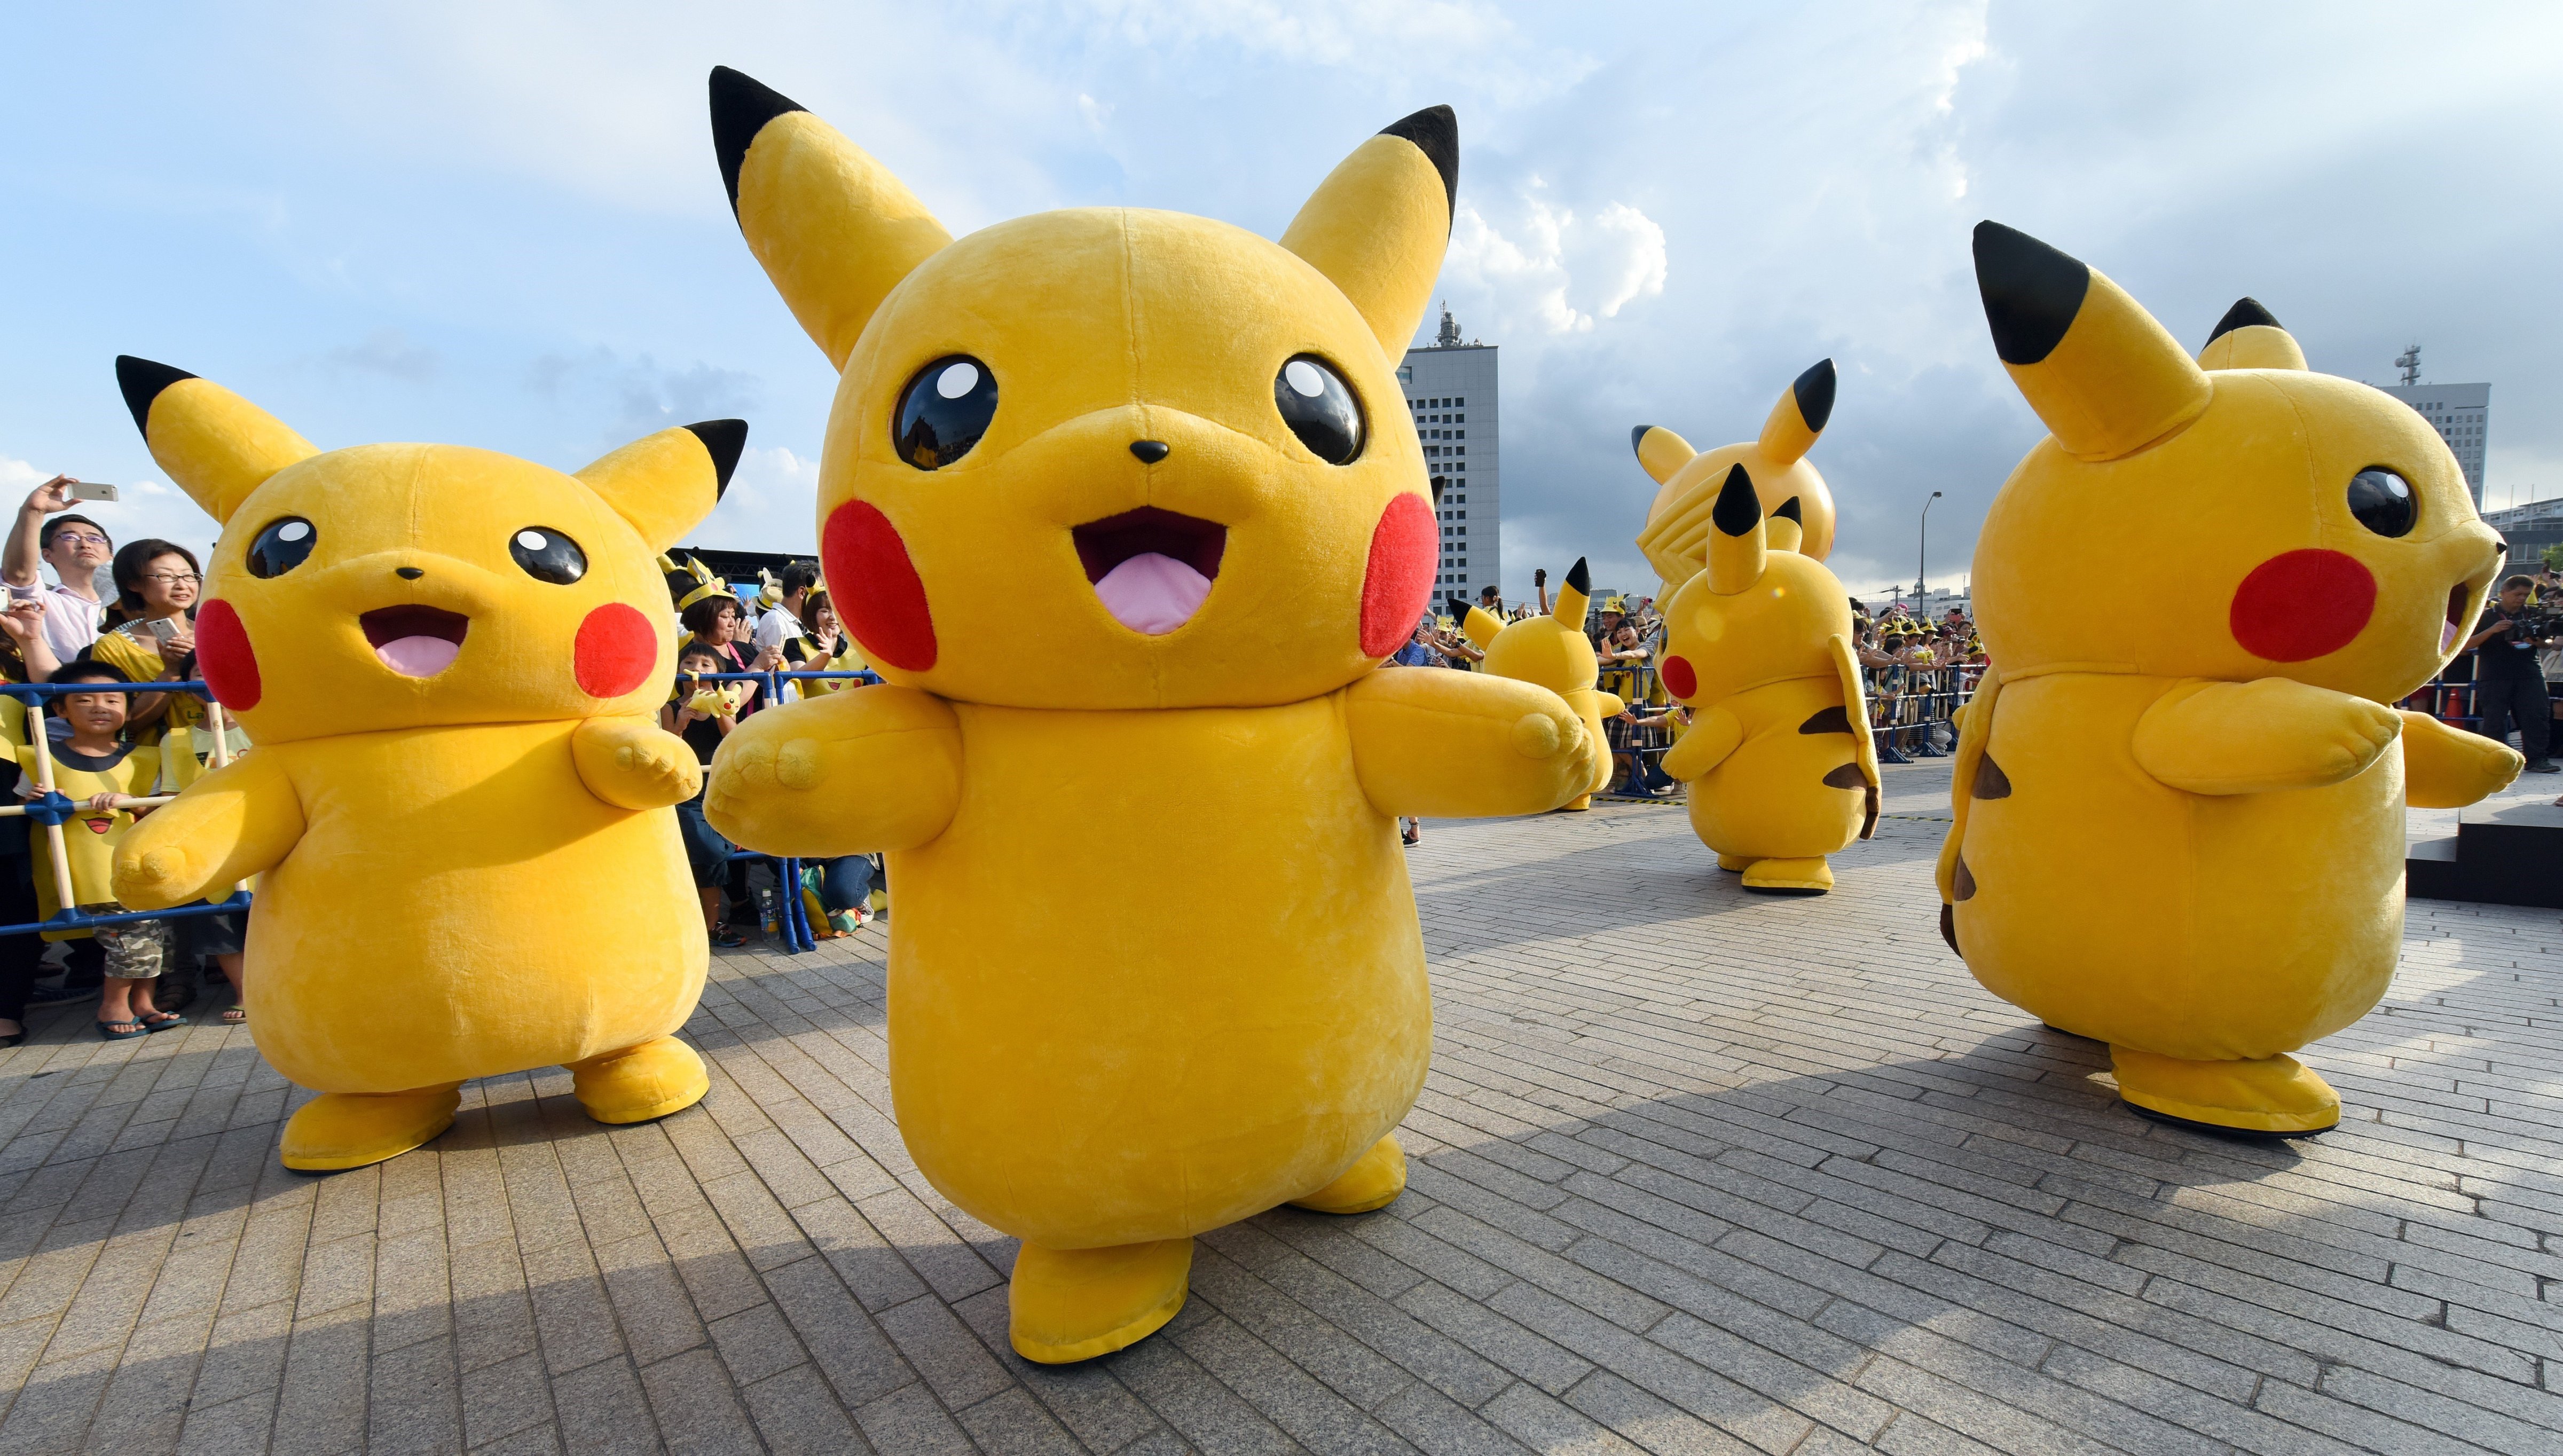 Dozens of people dressed up as Pikachu, the famous character of Nintendo's videogame software Pokemon, dance with fans as the final of a nine-day "Pikachu Outbreak" event takes place to attract summer vacationers in Yokohama, in suburban Tokyo, on August 16, 2015. (Toru Yamanaka—AFP/Getty Images)